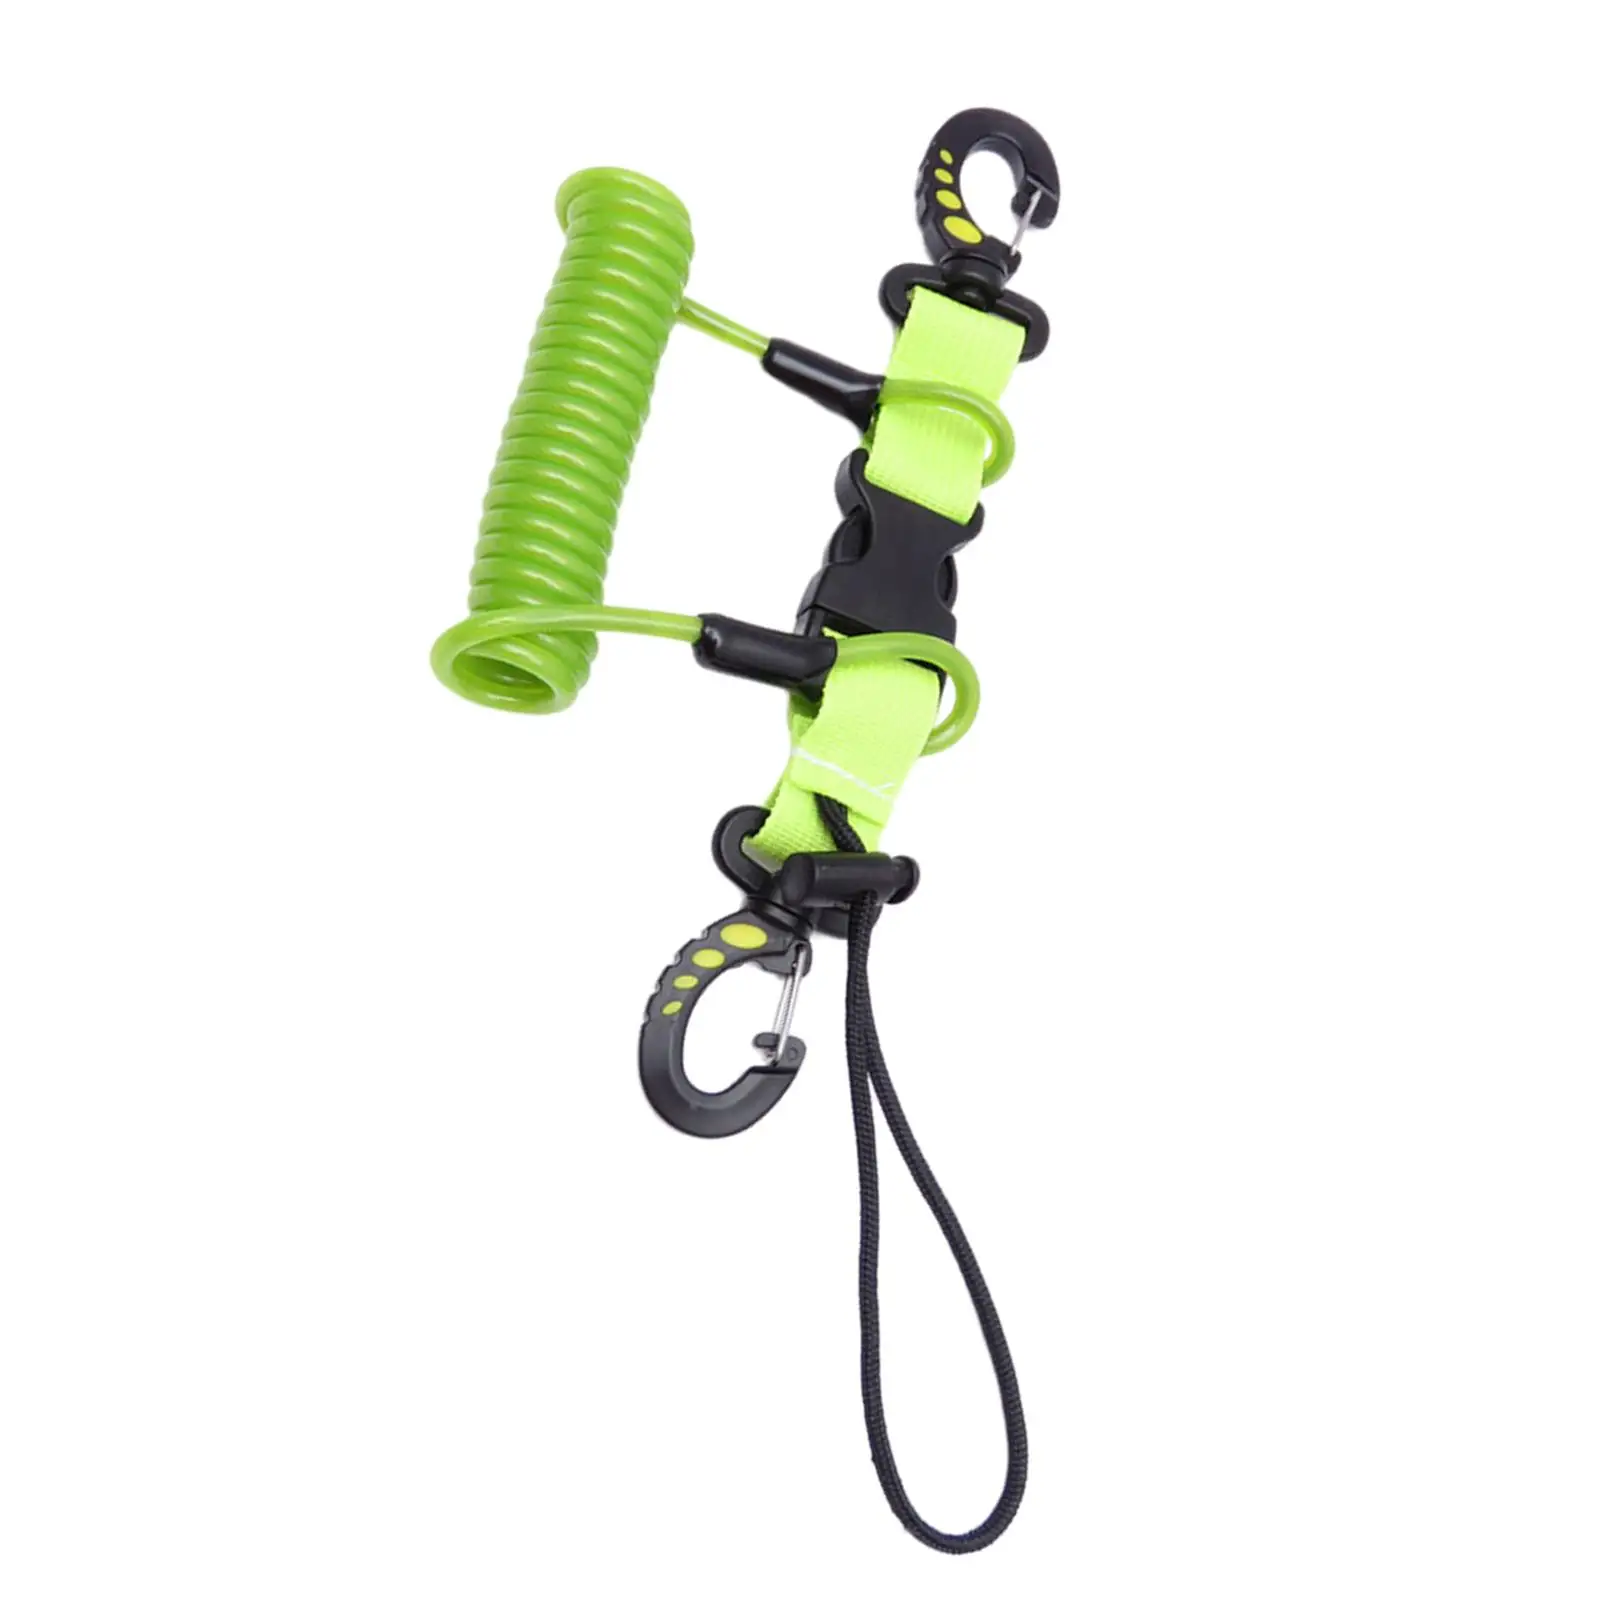 Scuba Diving Lanyard Anti Lost Spring Coiled Lanyard Clip for Diving Tools